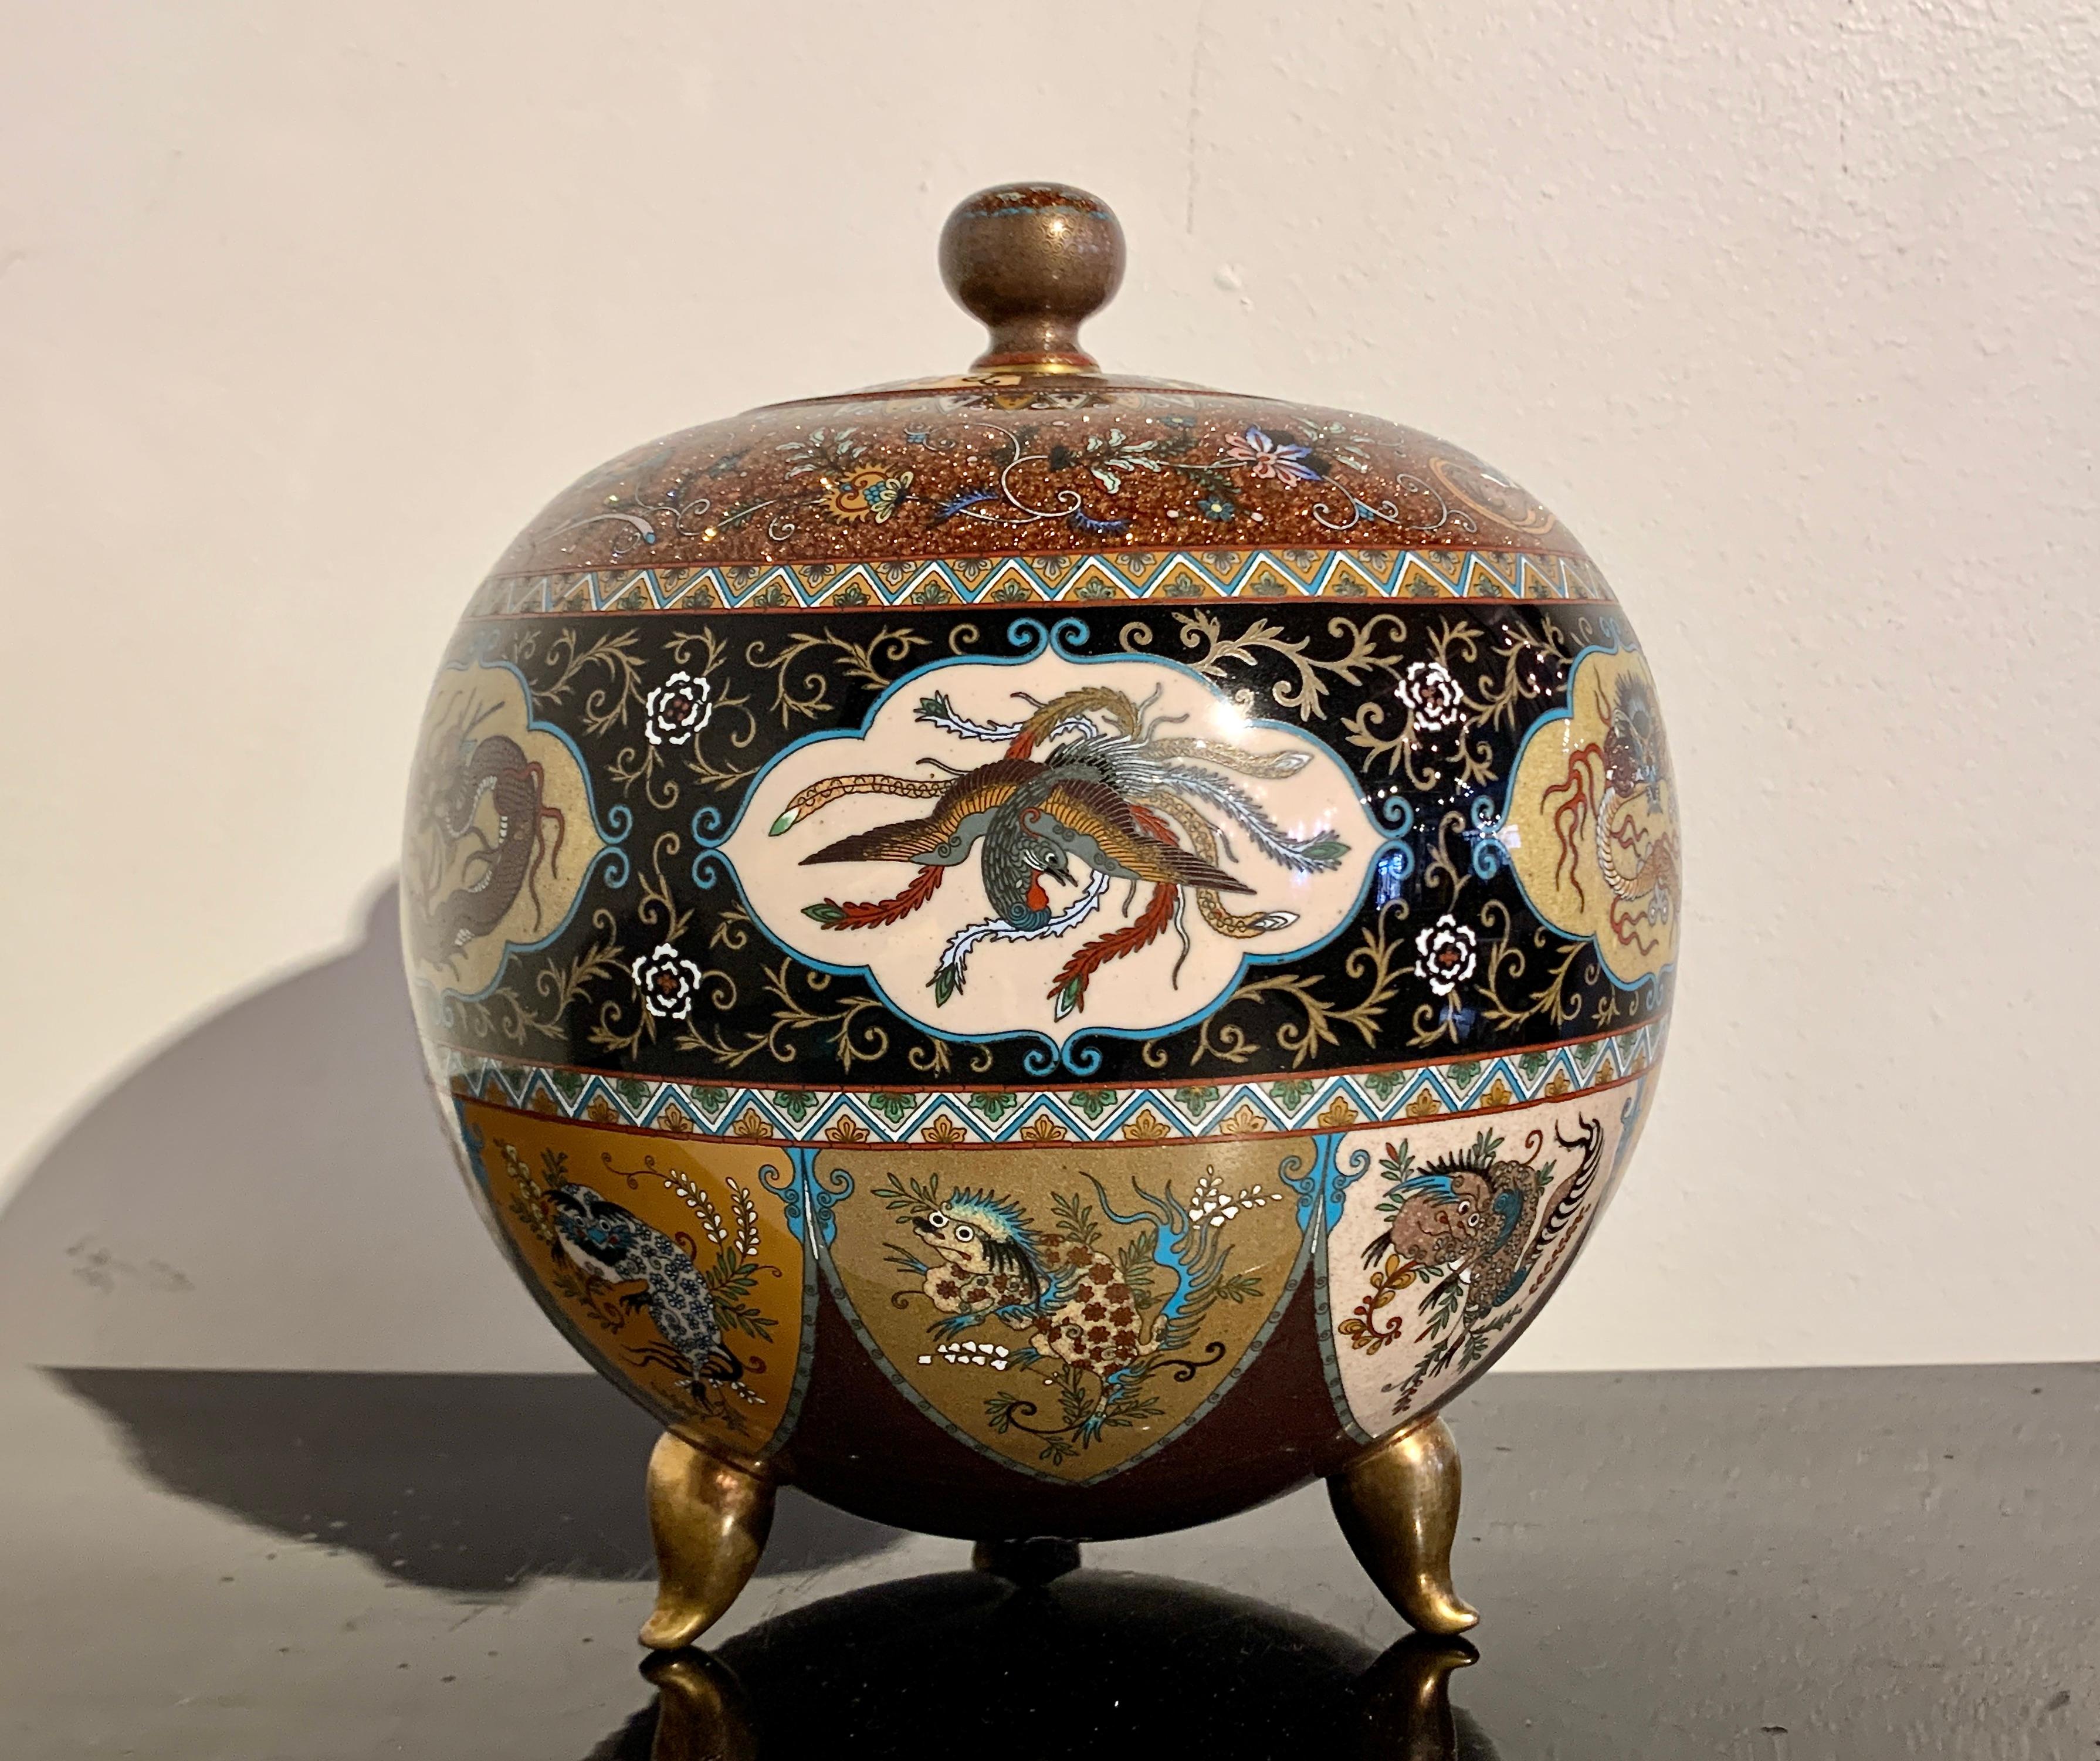 A spectacular large Japanese chakinseki cloisonné globular jar and cover, in he style of Namikawa Yasuyuki, Meiji period, circa 1900, Japan.

The jar with a spherical body supported by three, comma-shaped feet formed as magatama. Magatama are